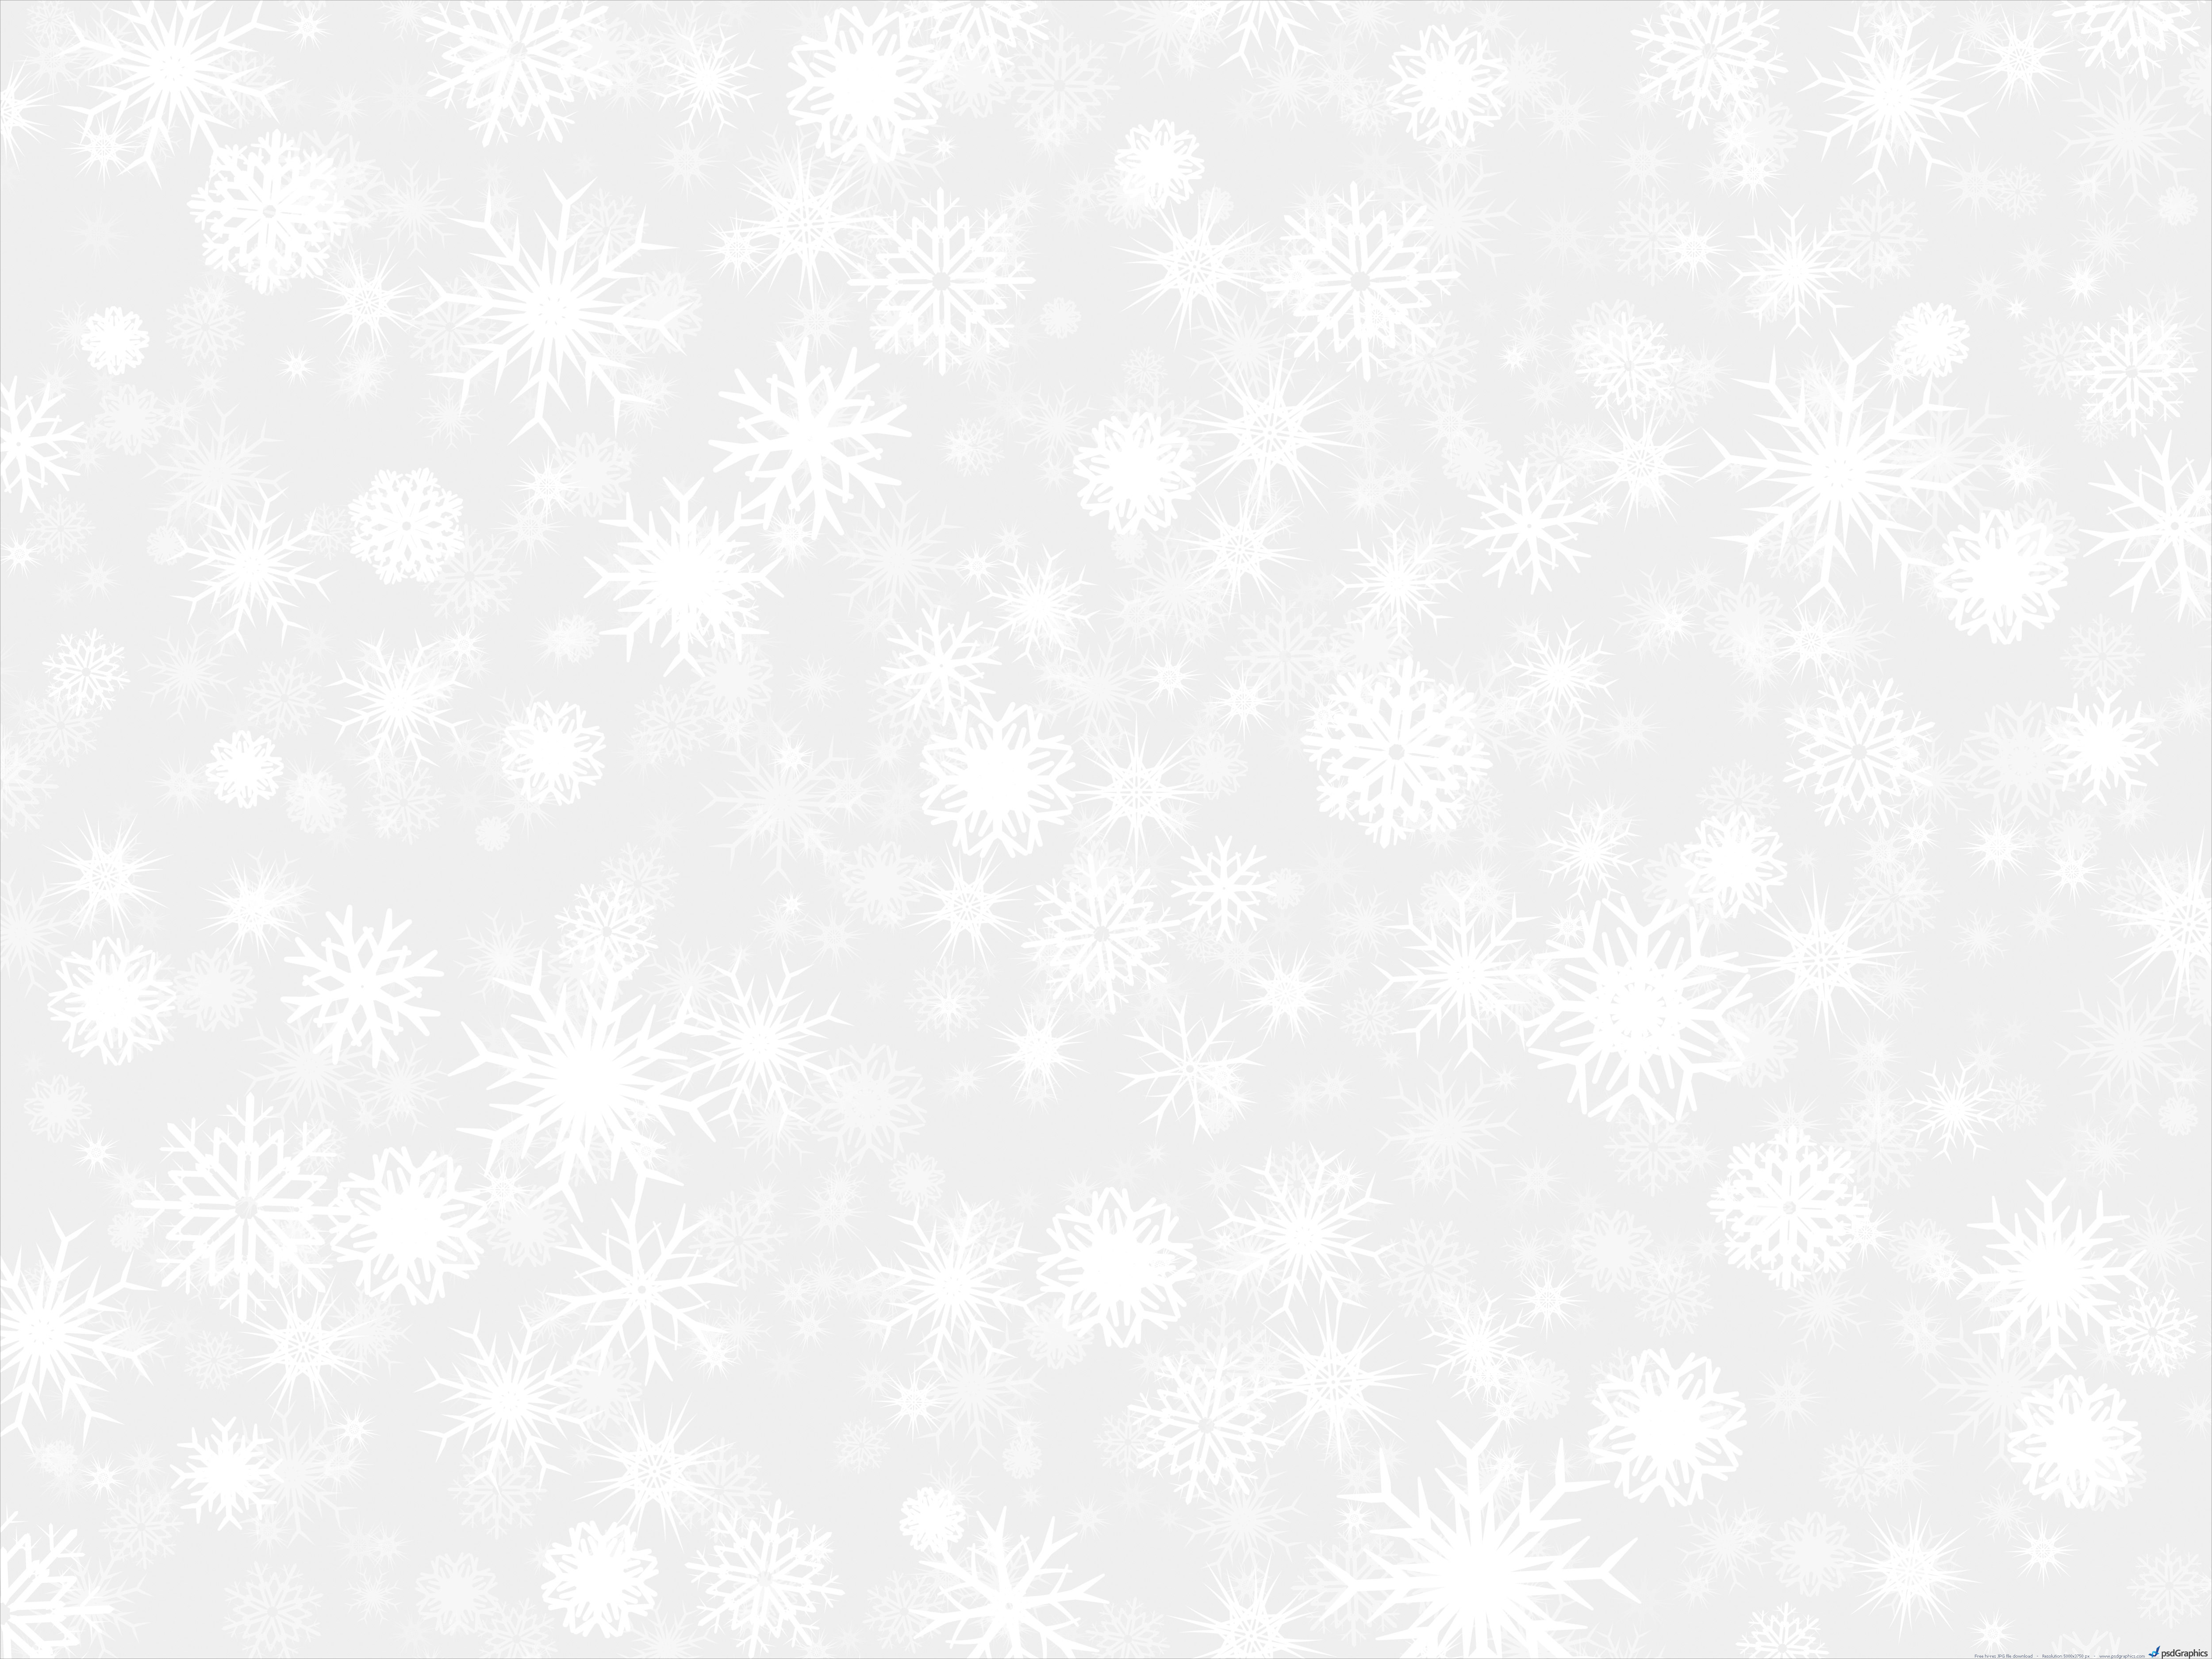 20 HQ Snow Backgrounds Wallpapers Images FreeCreatives